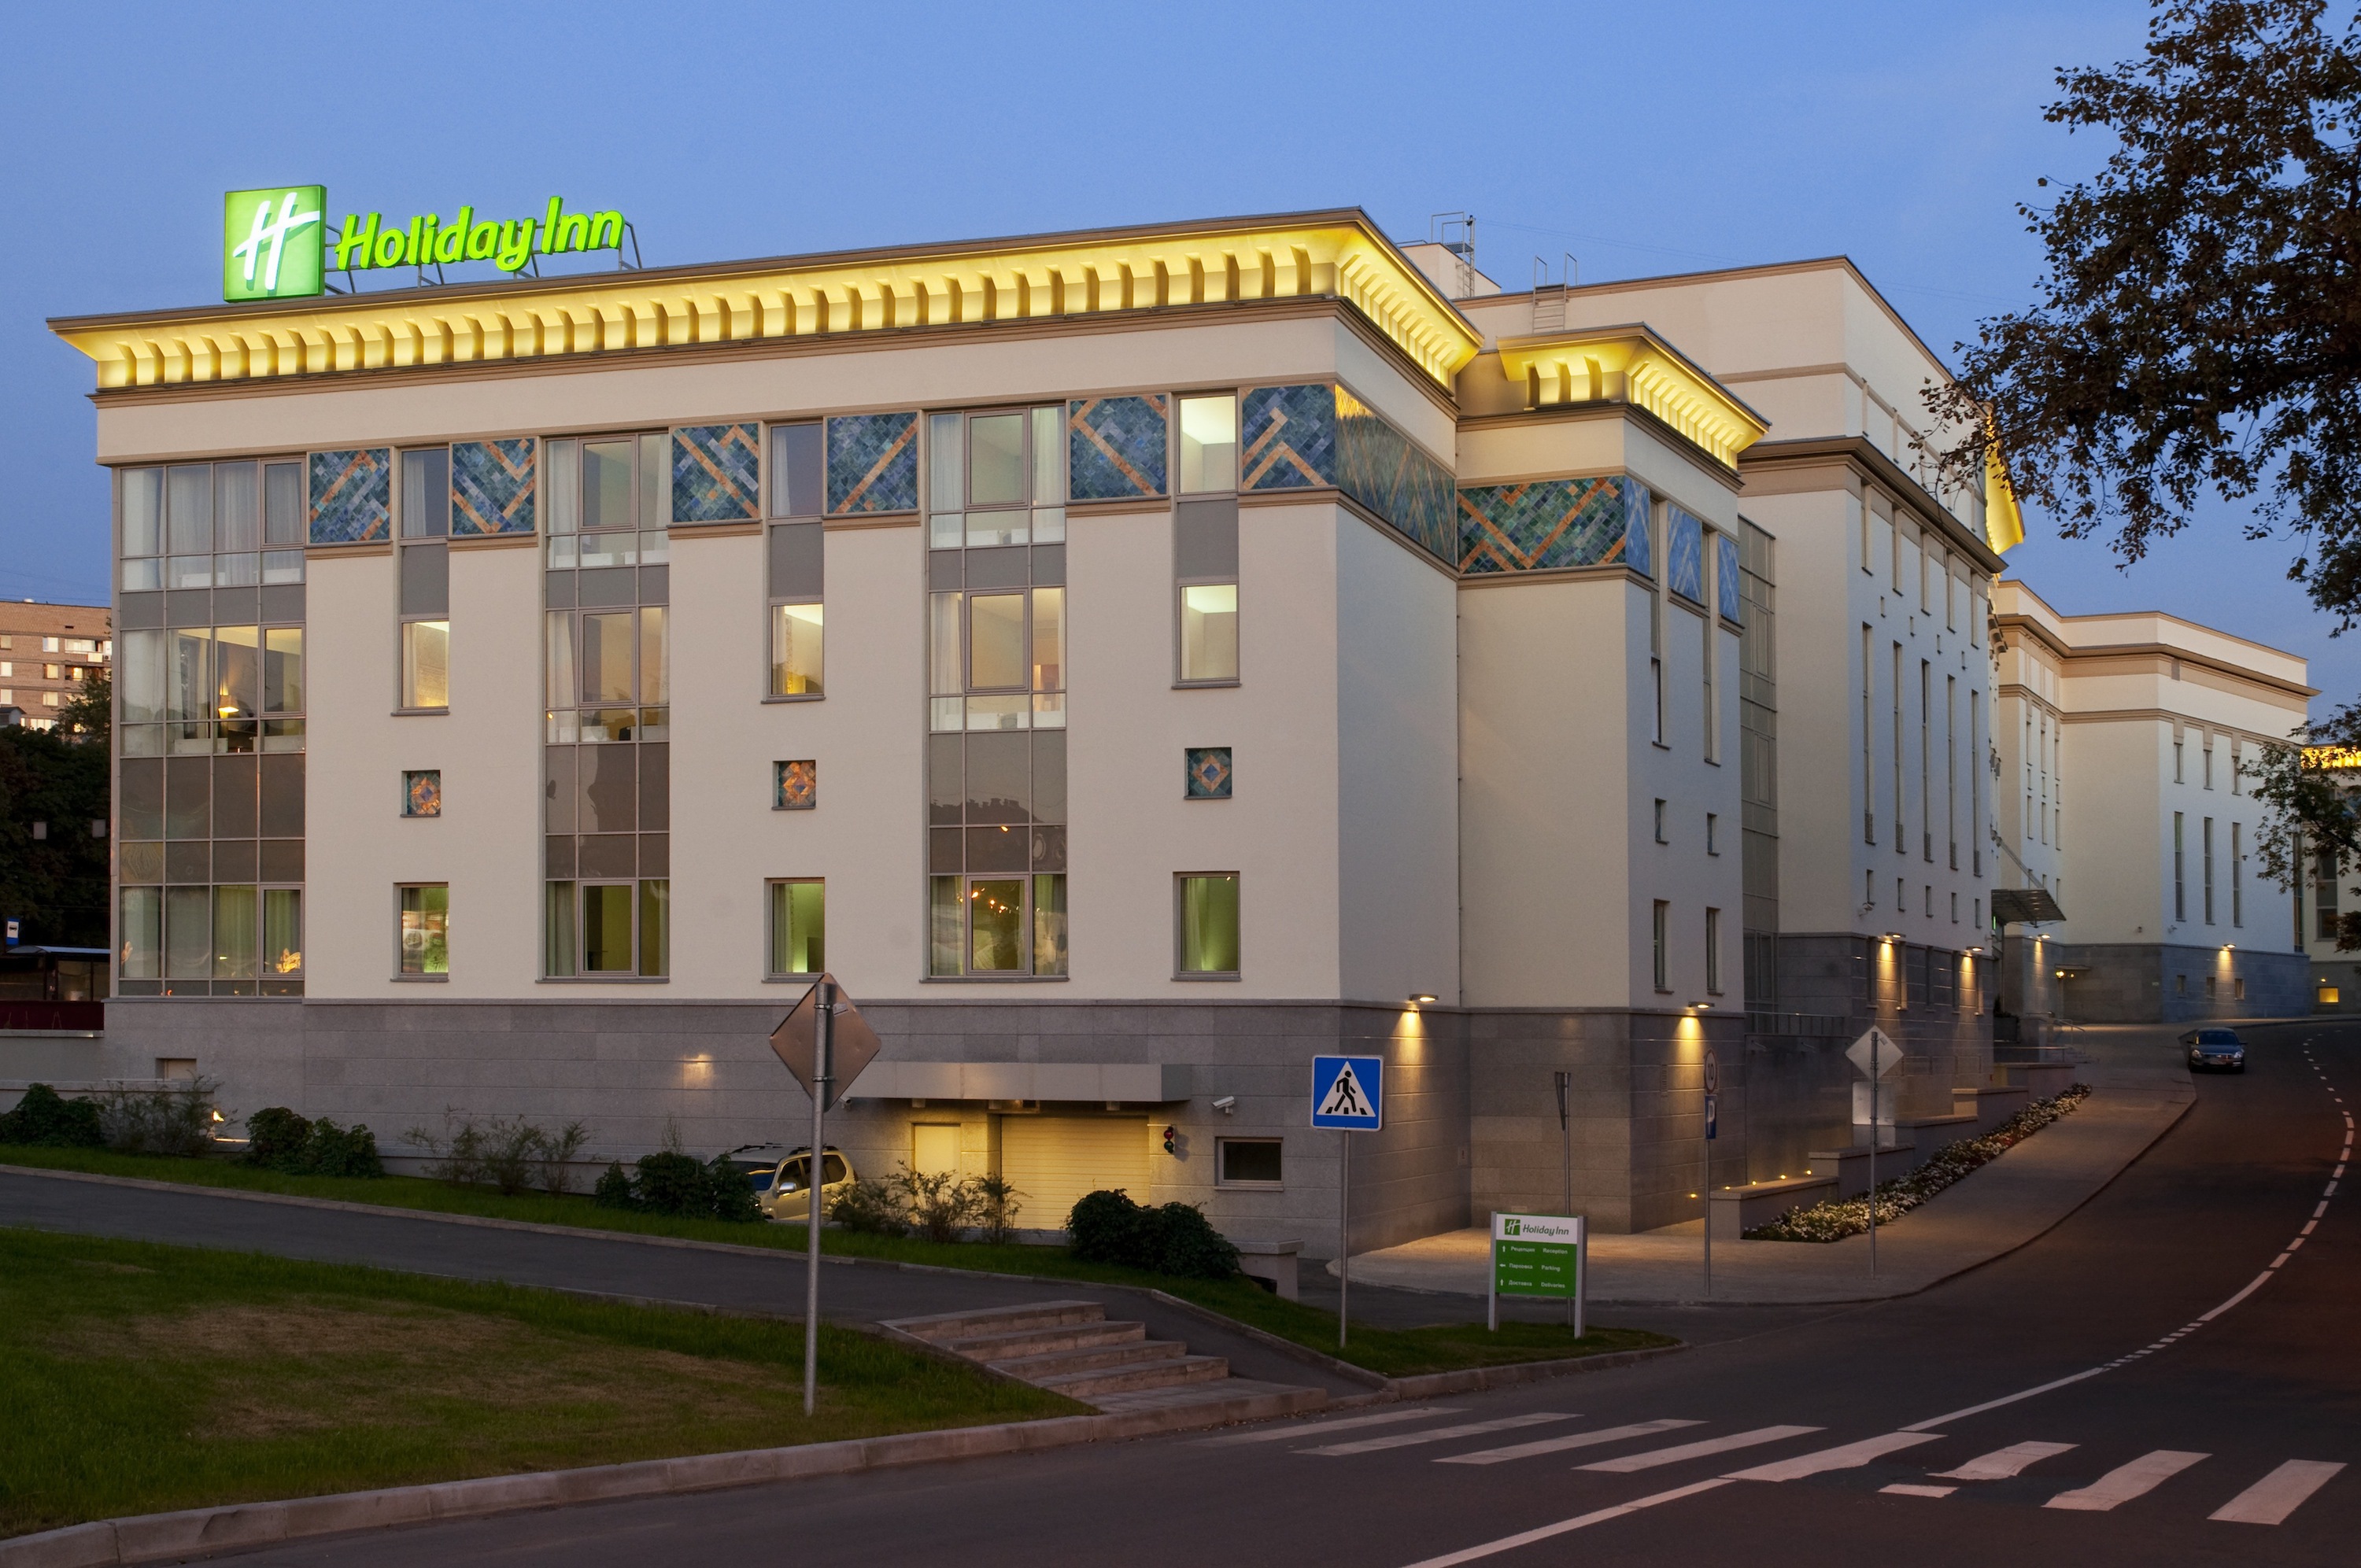 Photo of Holiday Inn Moscow Tagansky, Moscow, Russian Federation